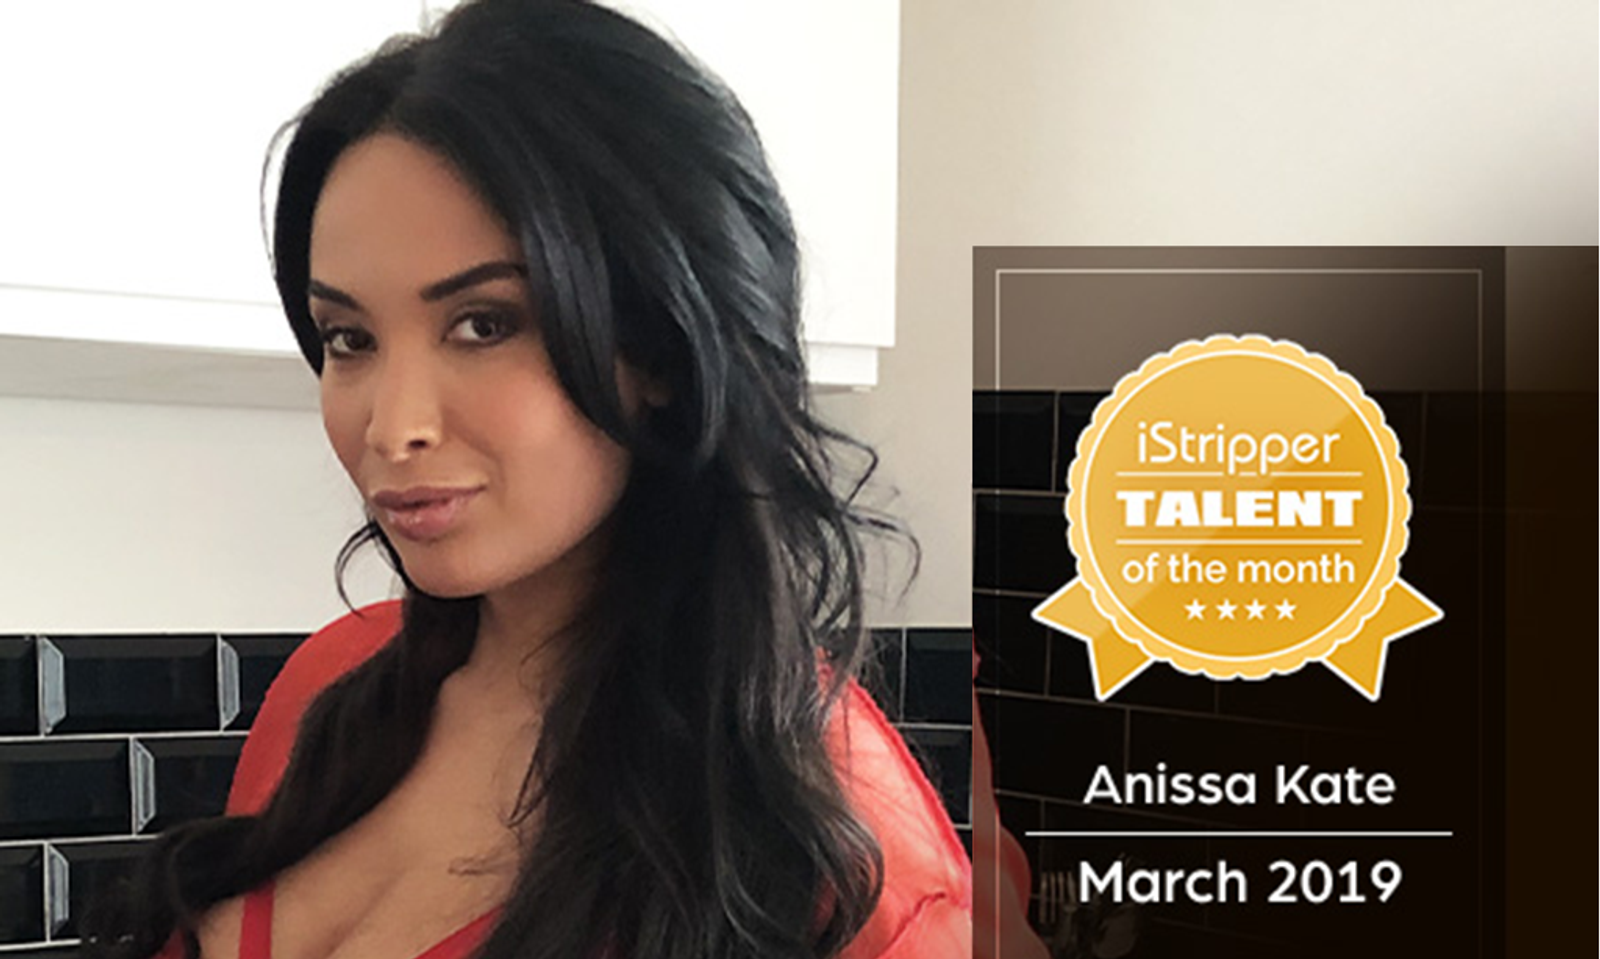 Anissa Kate named iStripper Talent of the Month for March 2019